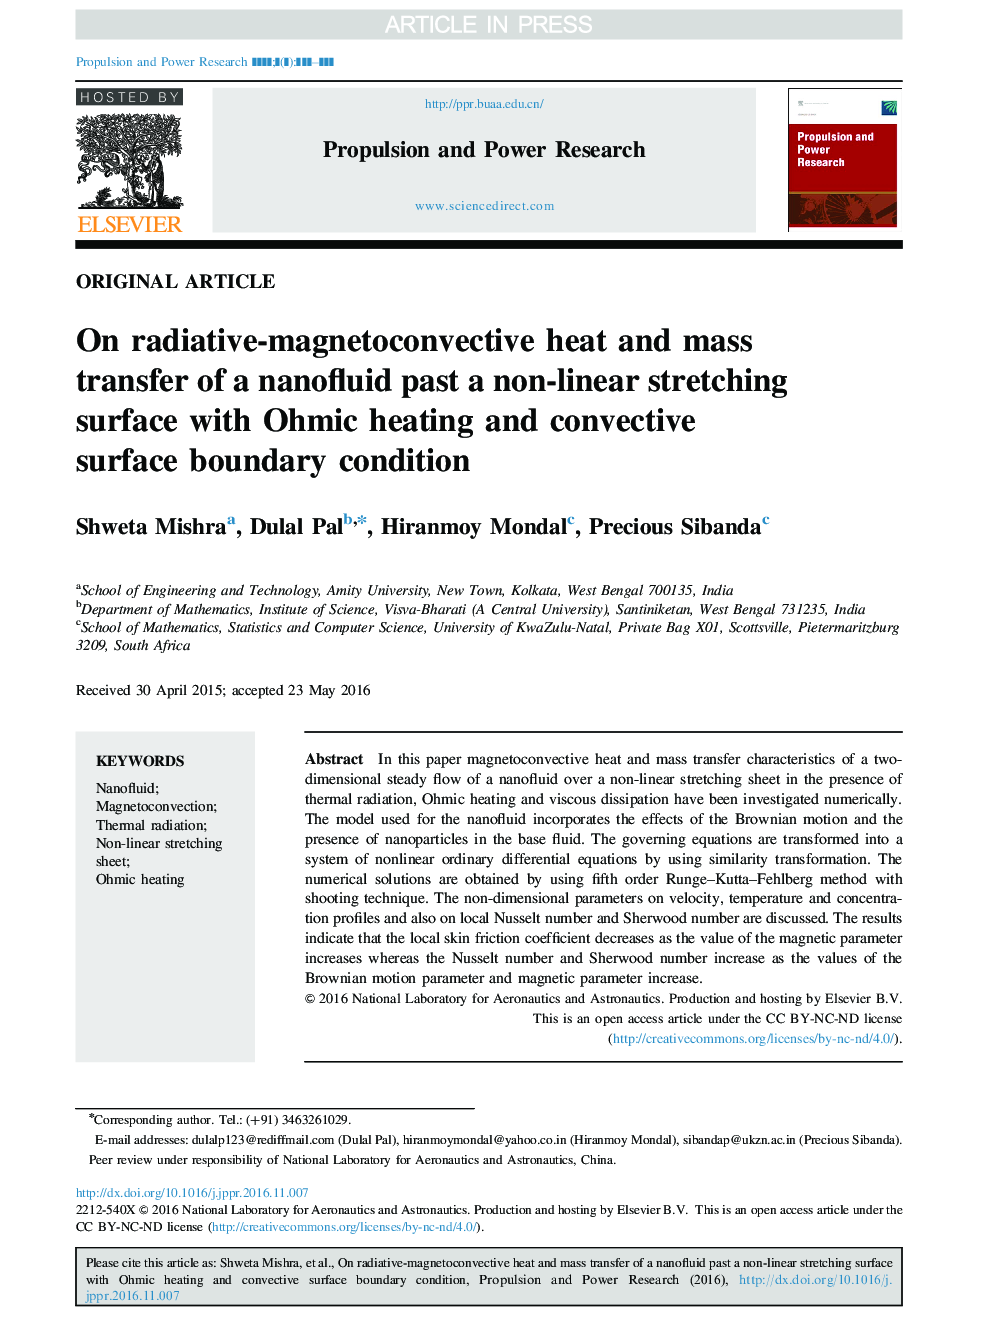 On radiative-magnetoconvective heat and mass transfer of a nanofluid past a non-linear stretching surface with Ohmic heating and convective surface boundary condition